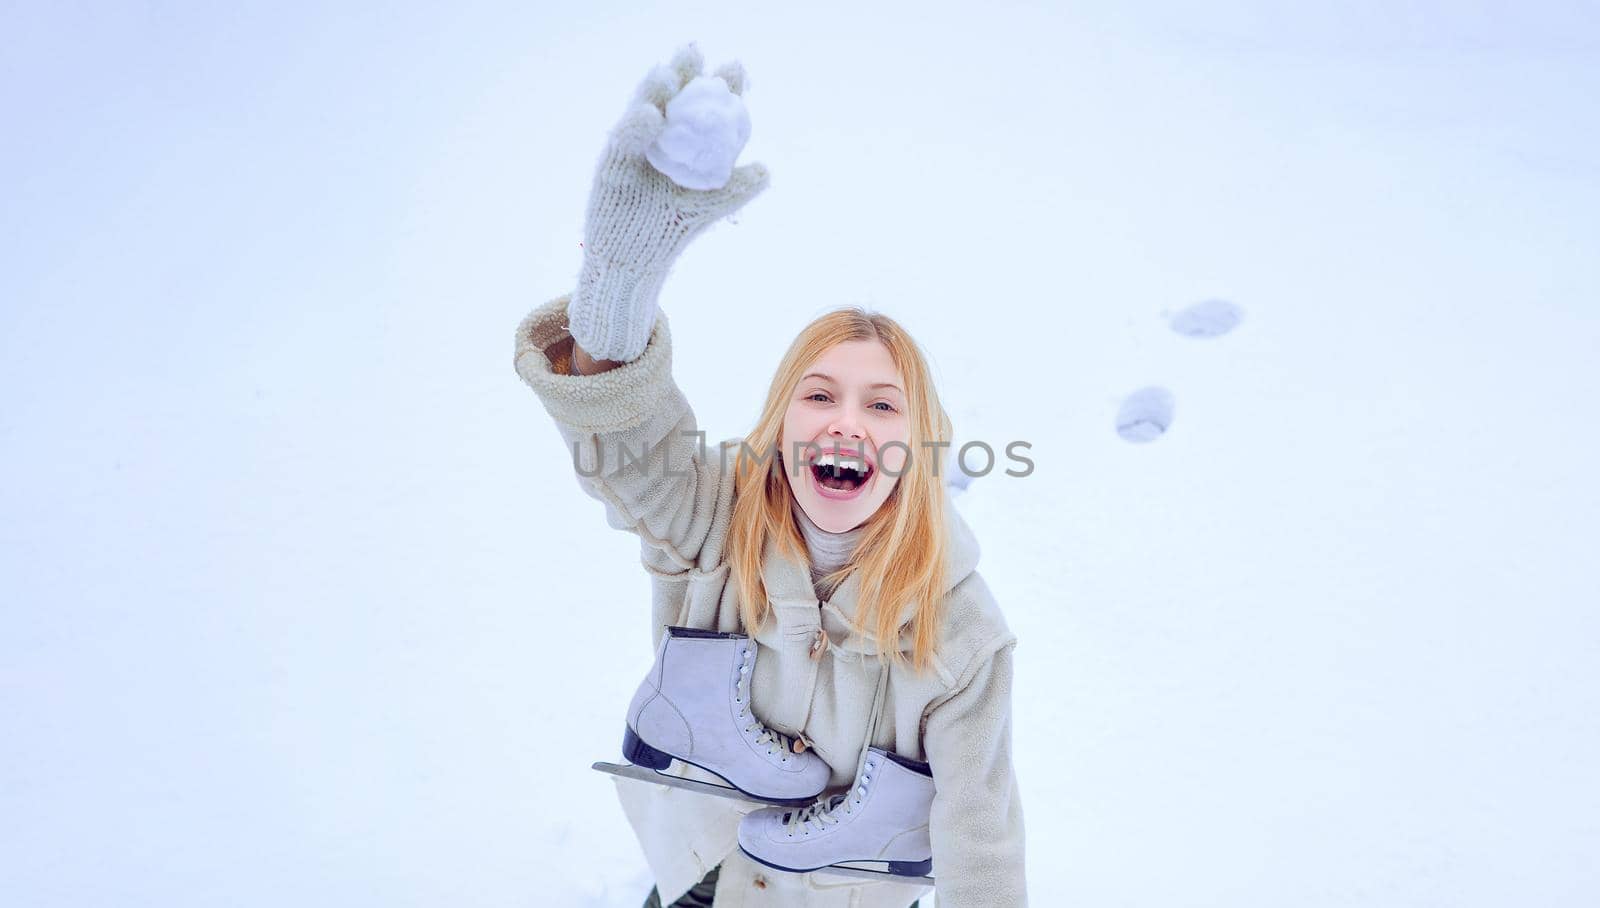 Funny smiling young woman in wintertime outdoor. Happy winter fun woman. Winter game. Beautiful smiling young woman in warm clothing with ice skates